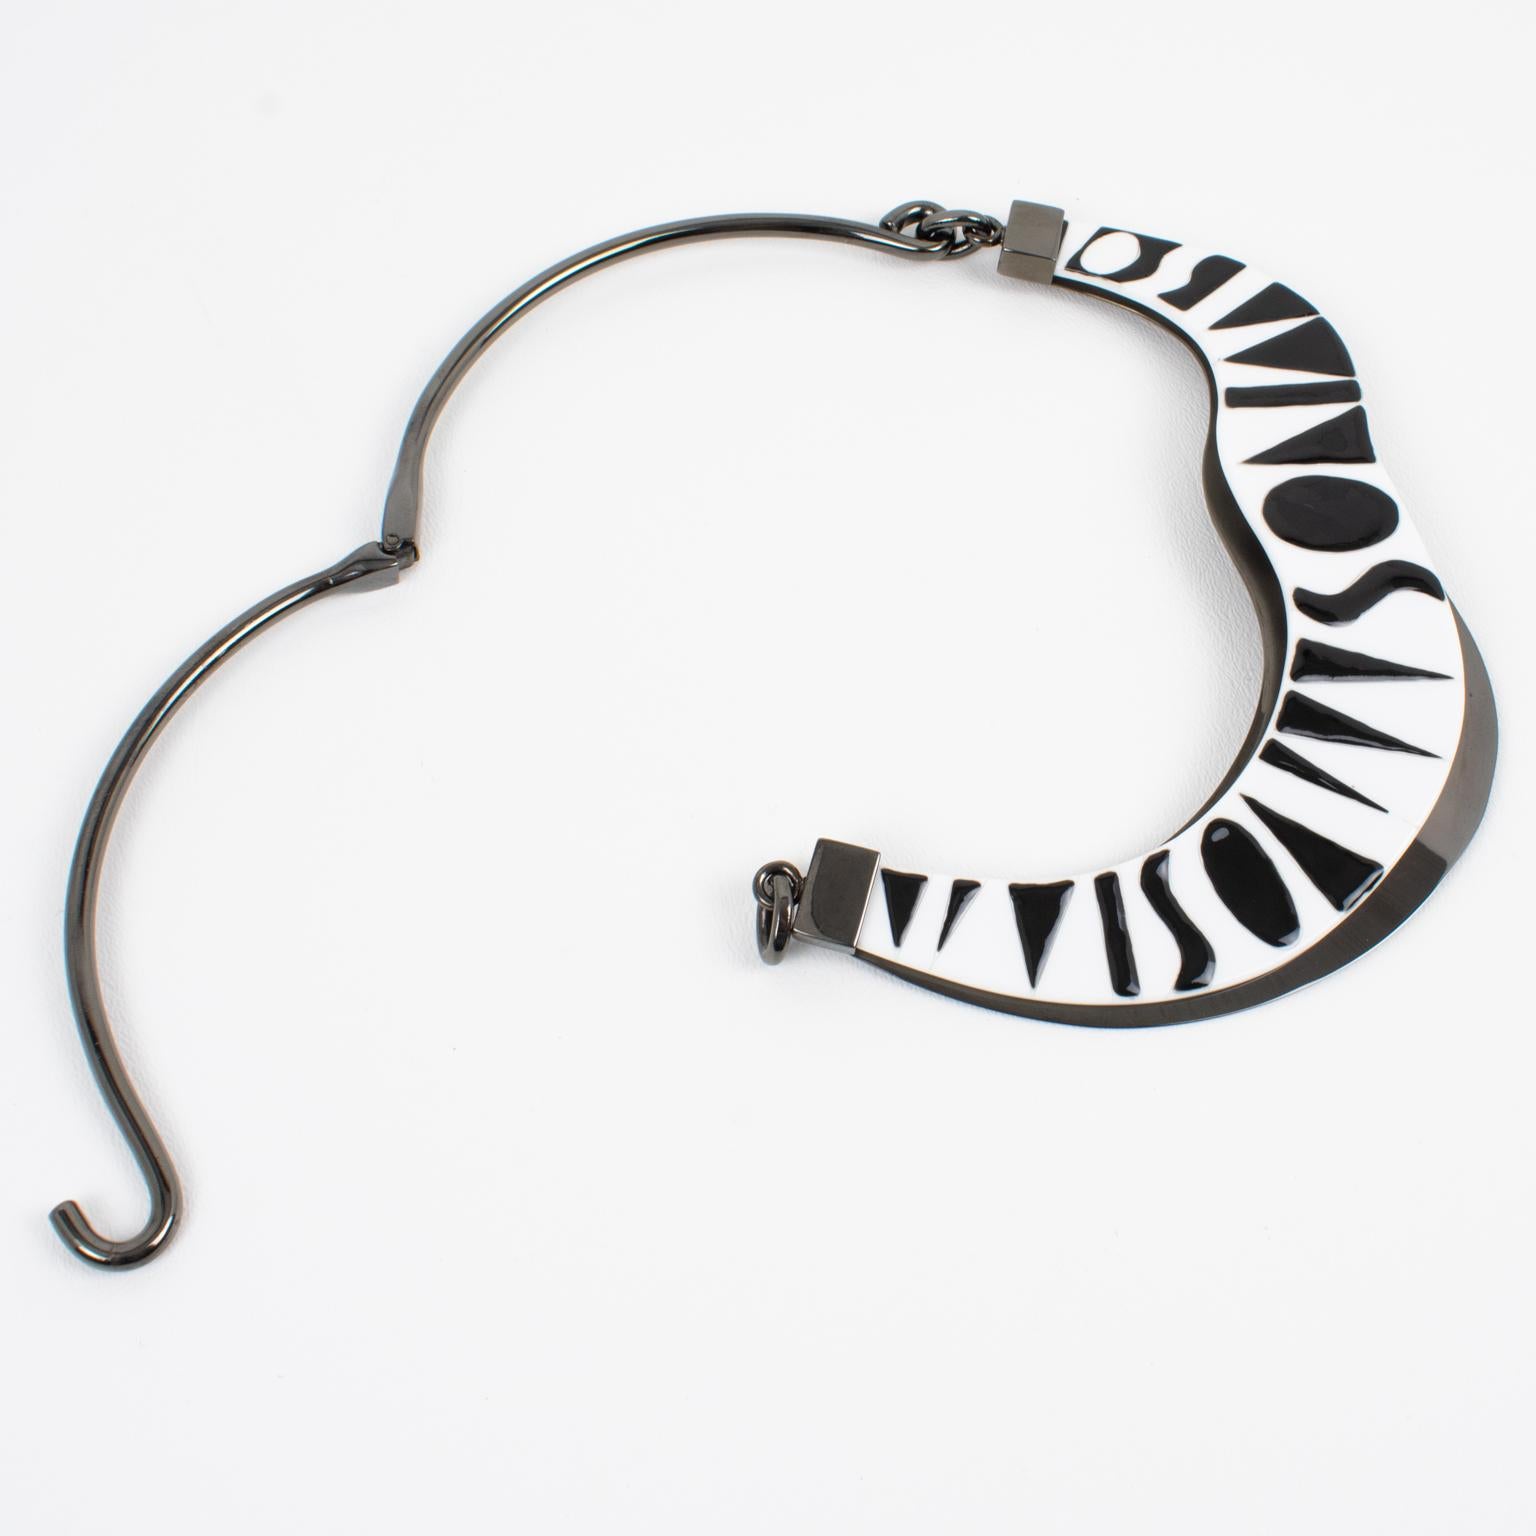 Missoni Black and White Lucite and Metal Choker Necklace, Runway Spring 2014 For Sale 2